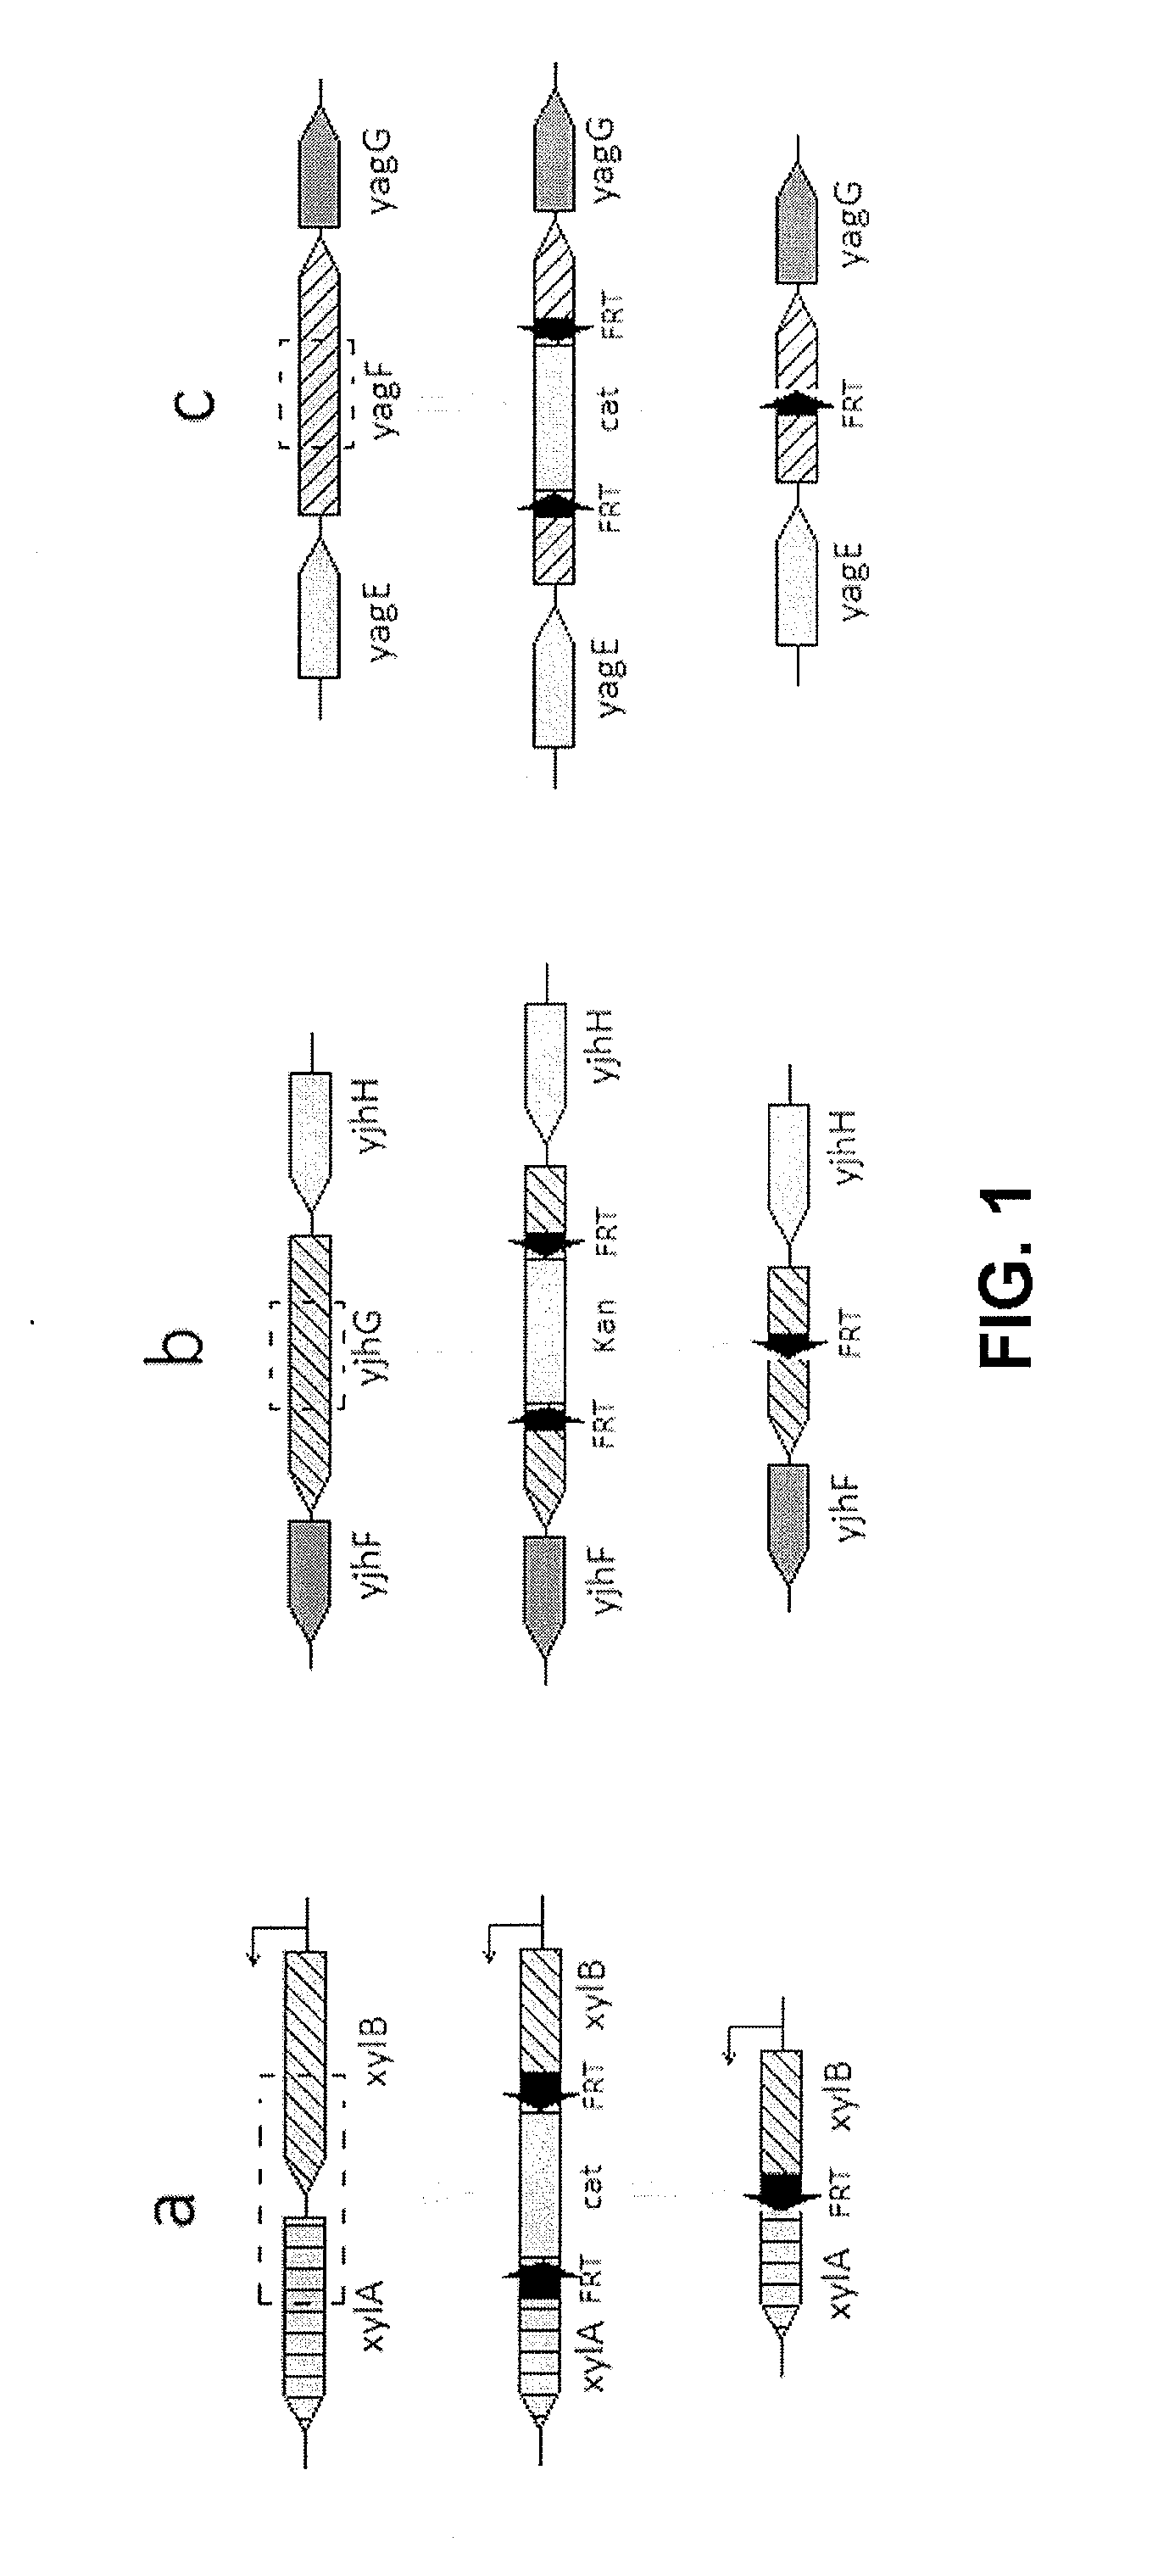 Recombinant Escherichia coli producing D-xylonic acid from D-xylose and method for producing D-xylonic acid using the same